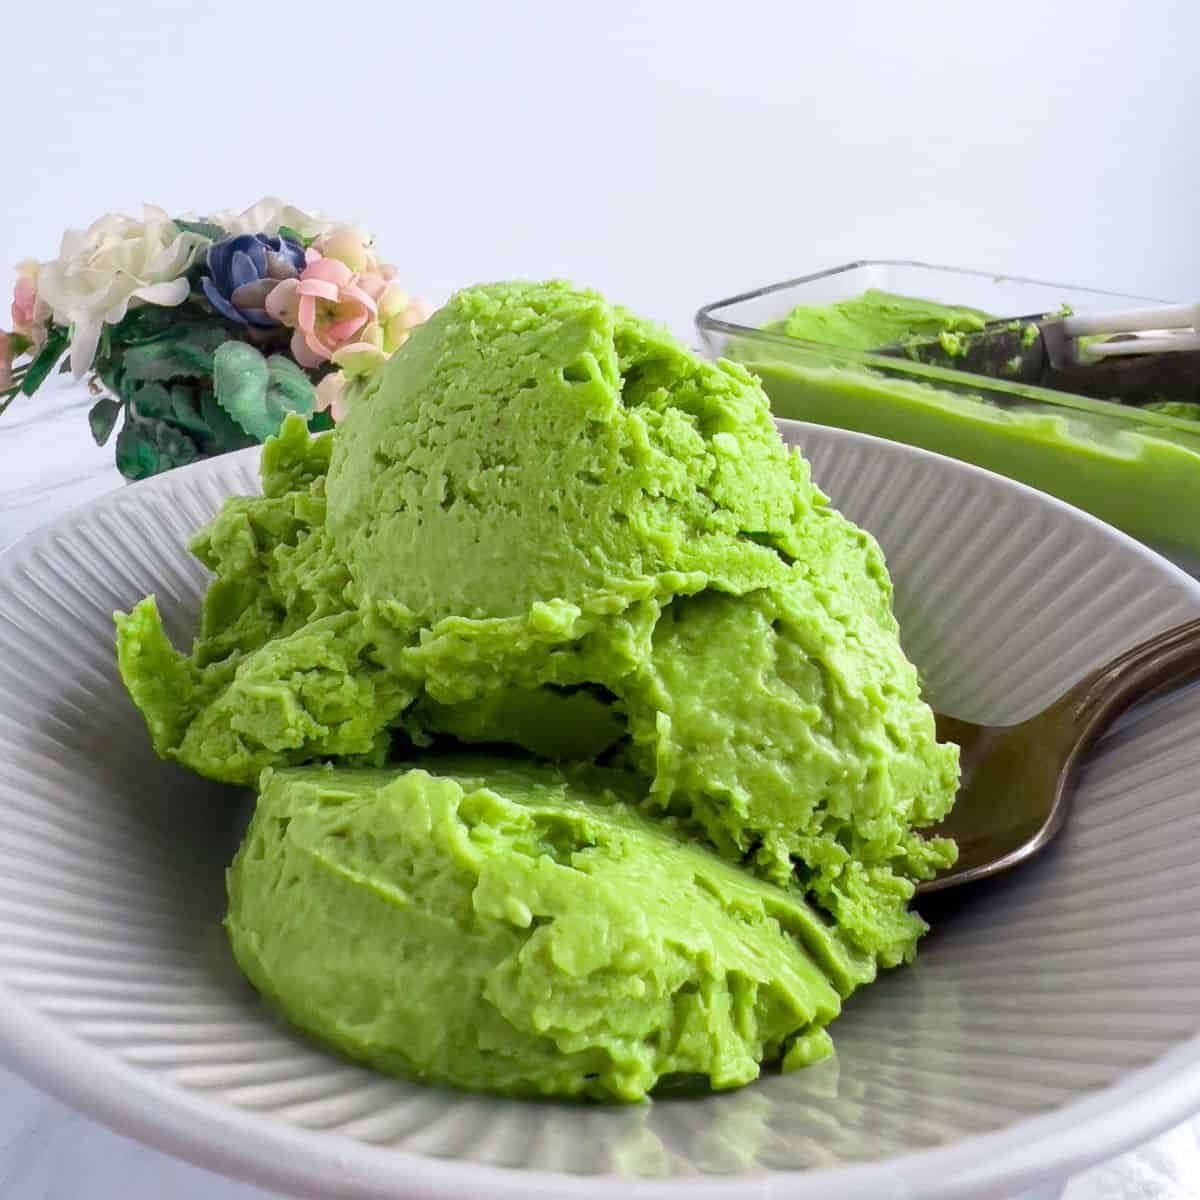 Avocado Nice Cream scoops in a bowl, ready to eat.